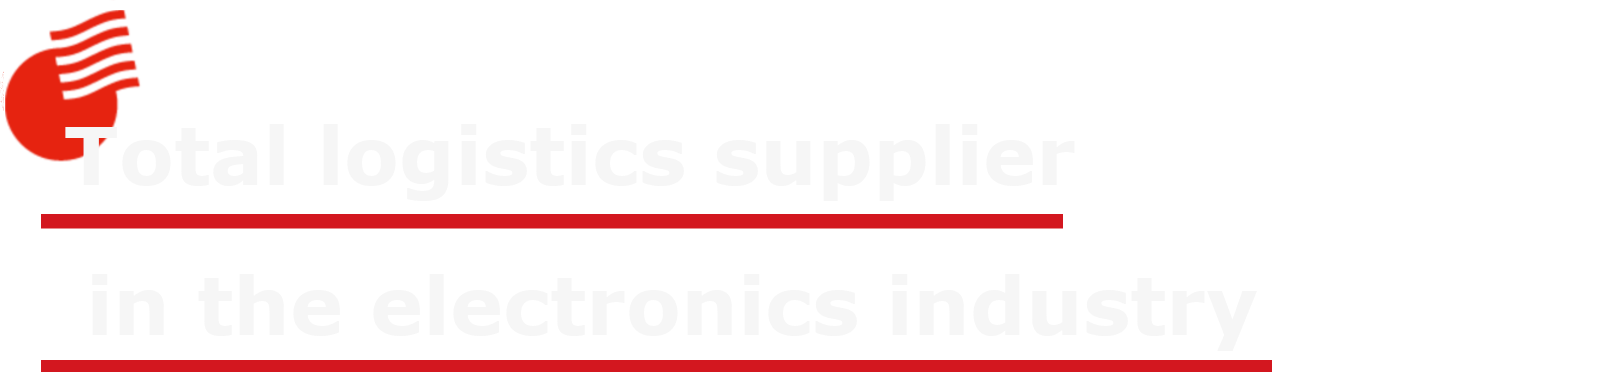 Total logistics supplier in the electronics industry